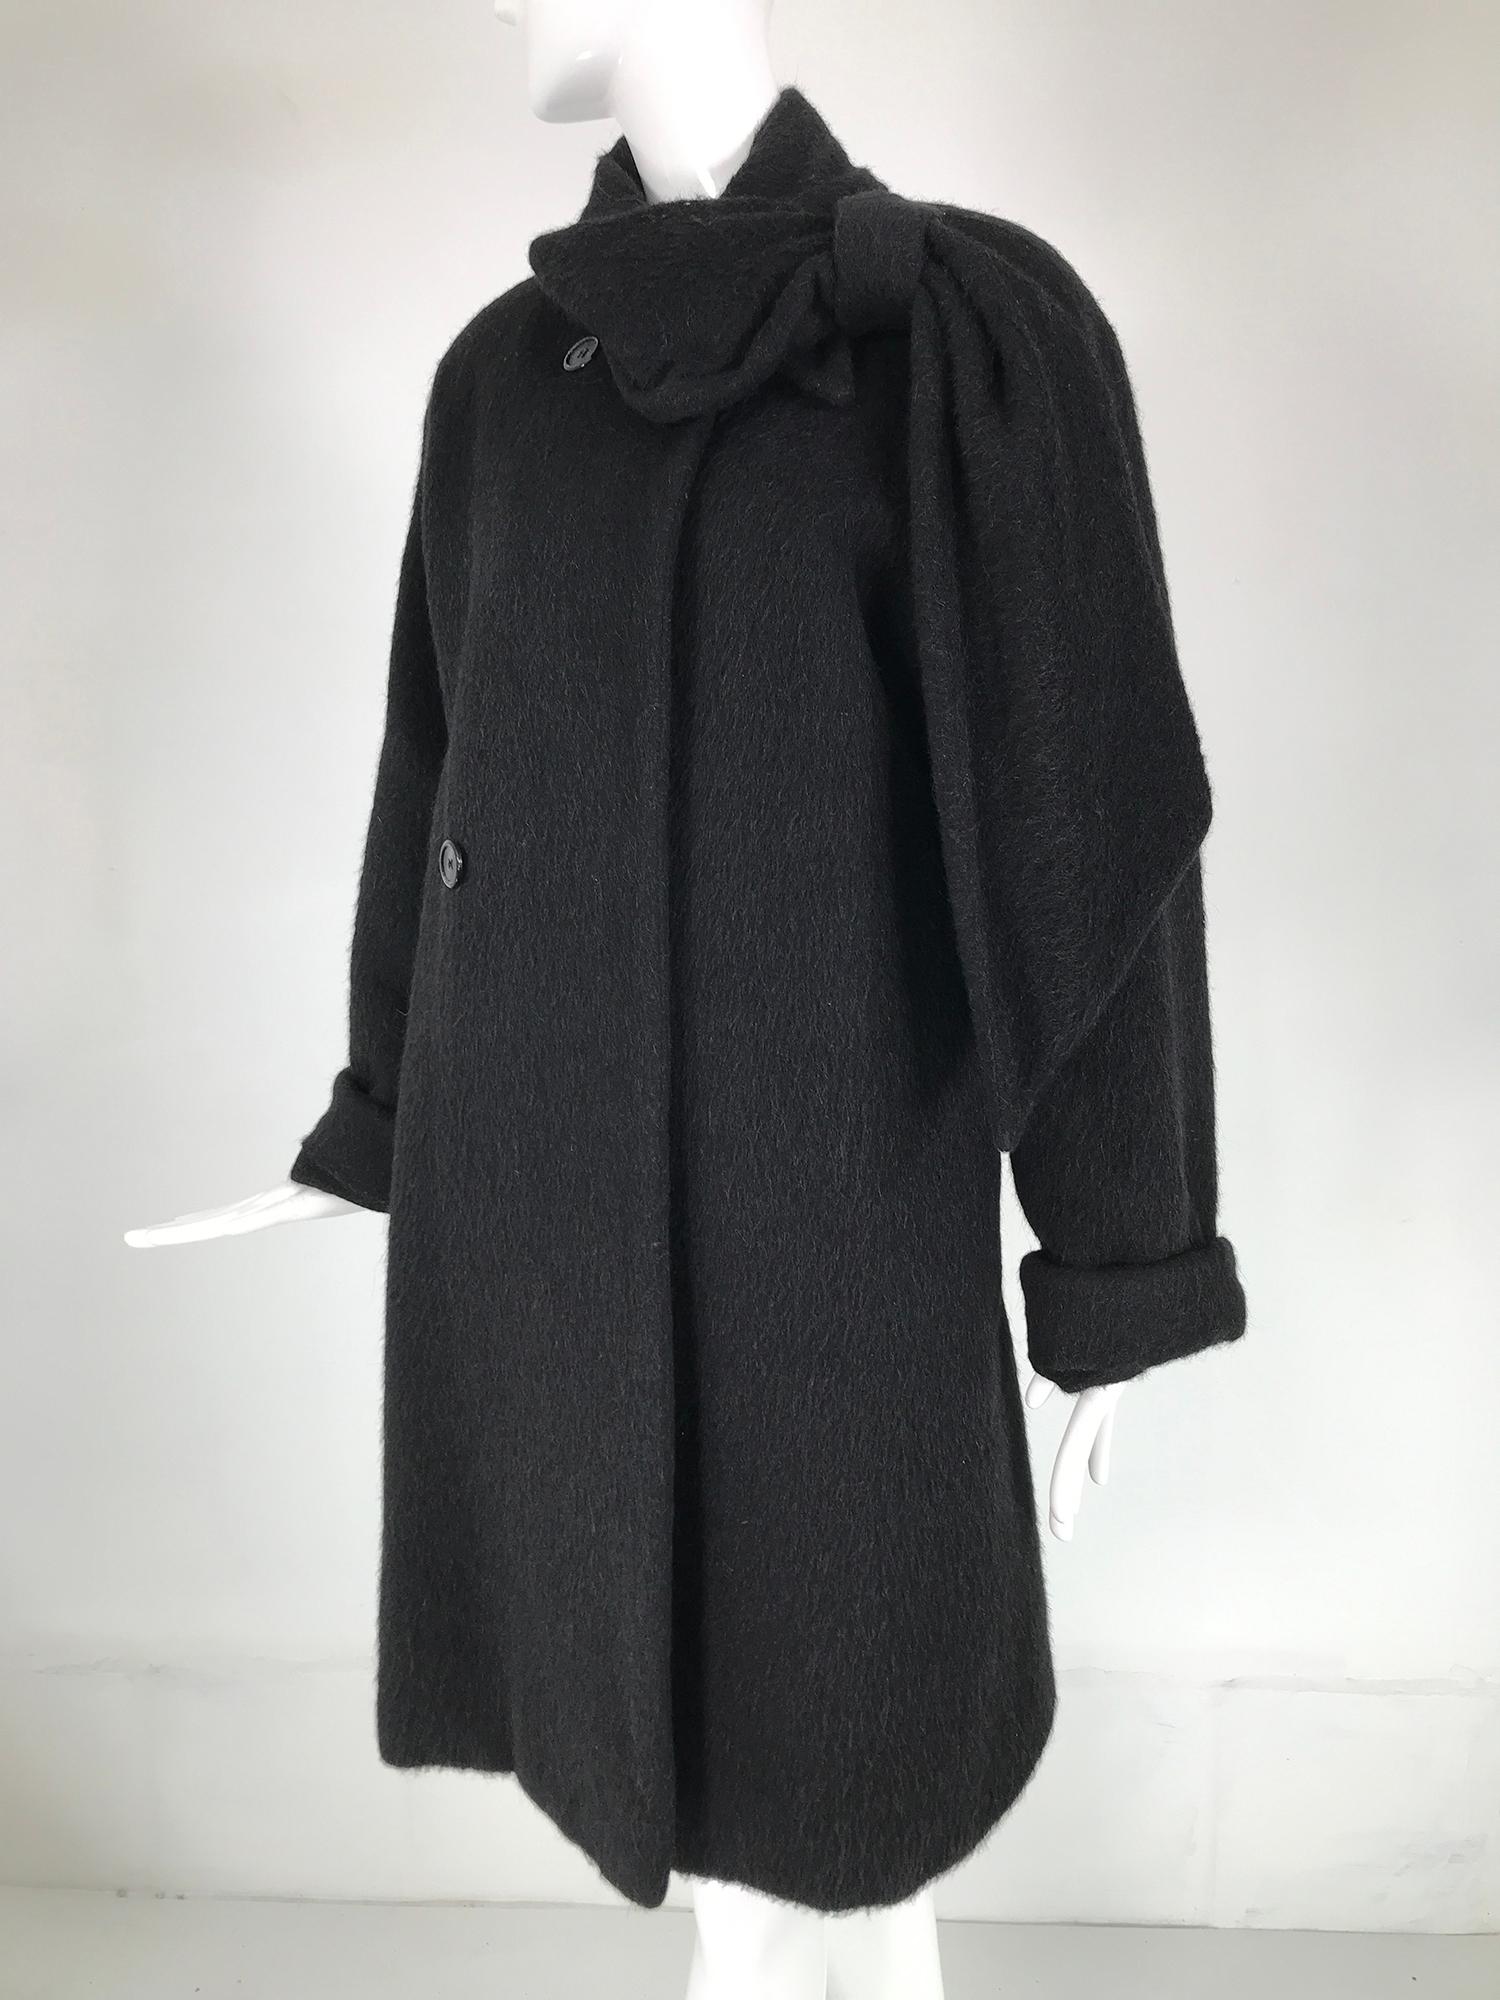 Christian Dior Charcoal Grey Mohair & Wool Winter Coat 1980s For Sale 1